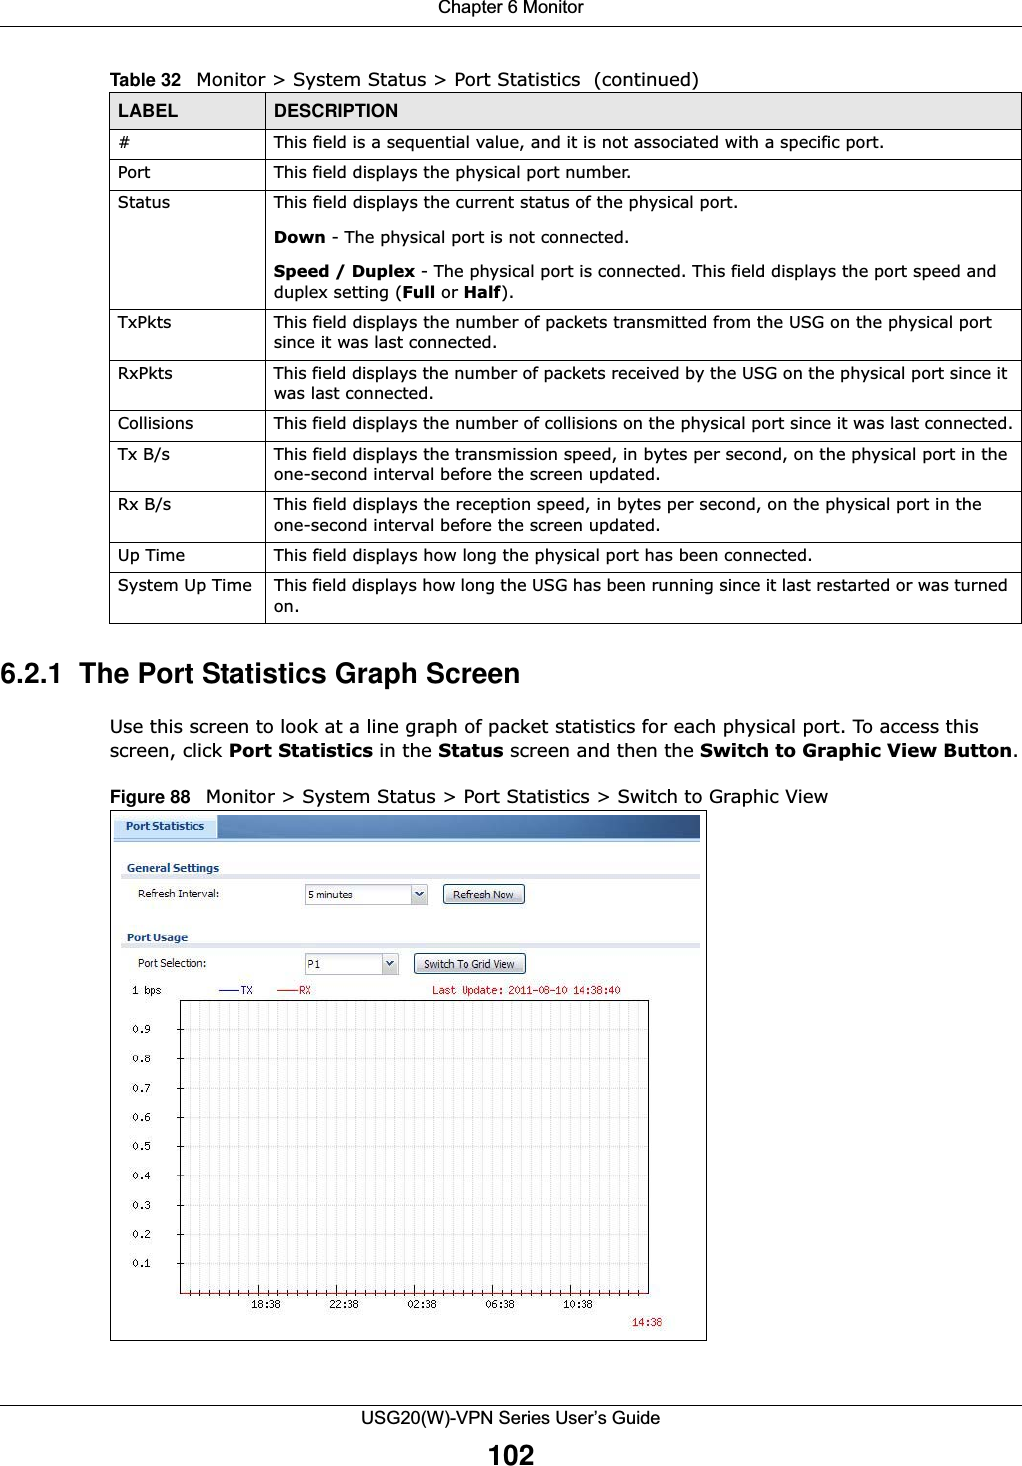 Chapter 6 MonitorUSG20(W)-VPN Series User’s Guide1026.2.1  The Port Statistics Graph Screen Use this screen to look at a line graph of packet statistics for each physical port. To access this screen, click Port Statistics in the Status screen and then the Switch to Graphic View Button.Figure 88   Monitor &gt; System Status &gt; Port Statistics &gt; Switch to Graphic View    # This field is a sequential value, and it is not associated with a specific port.Port This field displays the physical port number.Status This field displays the current status of the physical port. Down - The physical port is not connected.Speed / Duplex - The physical port is connected. This field displays the port speed and duplex setting (Full or Half).TxPkts This field displays the number of packets transmitted from the USG on the physical port since it was last connected.RxPkts This field displays the number of packets received by the USG on the physical port since it was last connected.Collisions This field displays the number of collisions on the physical port since it was last connected.Tx B/s This field displays the transmission speed, in bytes per second, on the physical port in the one-second interval before the screen updated.Rx B/s This field displays the reception speed, in bytes per second, on the physical port in the one-second interval before the screen updated.Up Time This field displays how long the physical port has been connected.System Up Time This field displays how long the USG has been running since it last restarted or was turned on.Table 32   Monitor &gt; System Status &gt; Port Statistics  (continued)LABEL DESCRIPTION